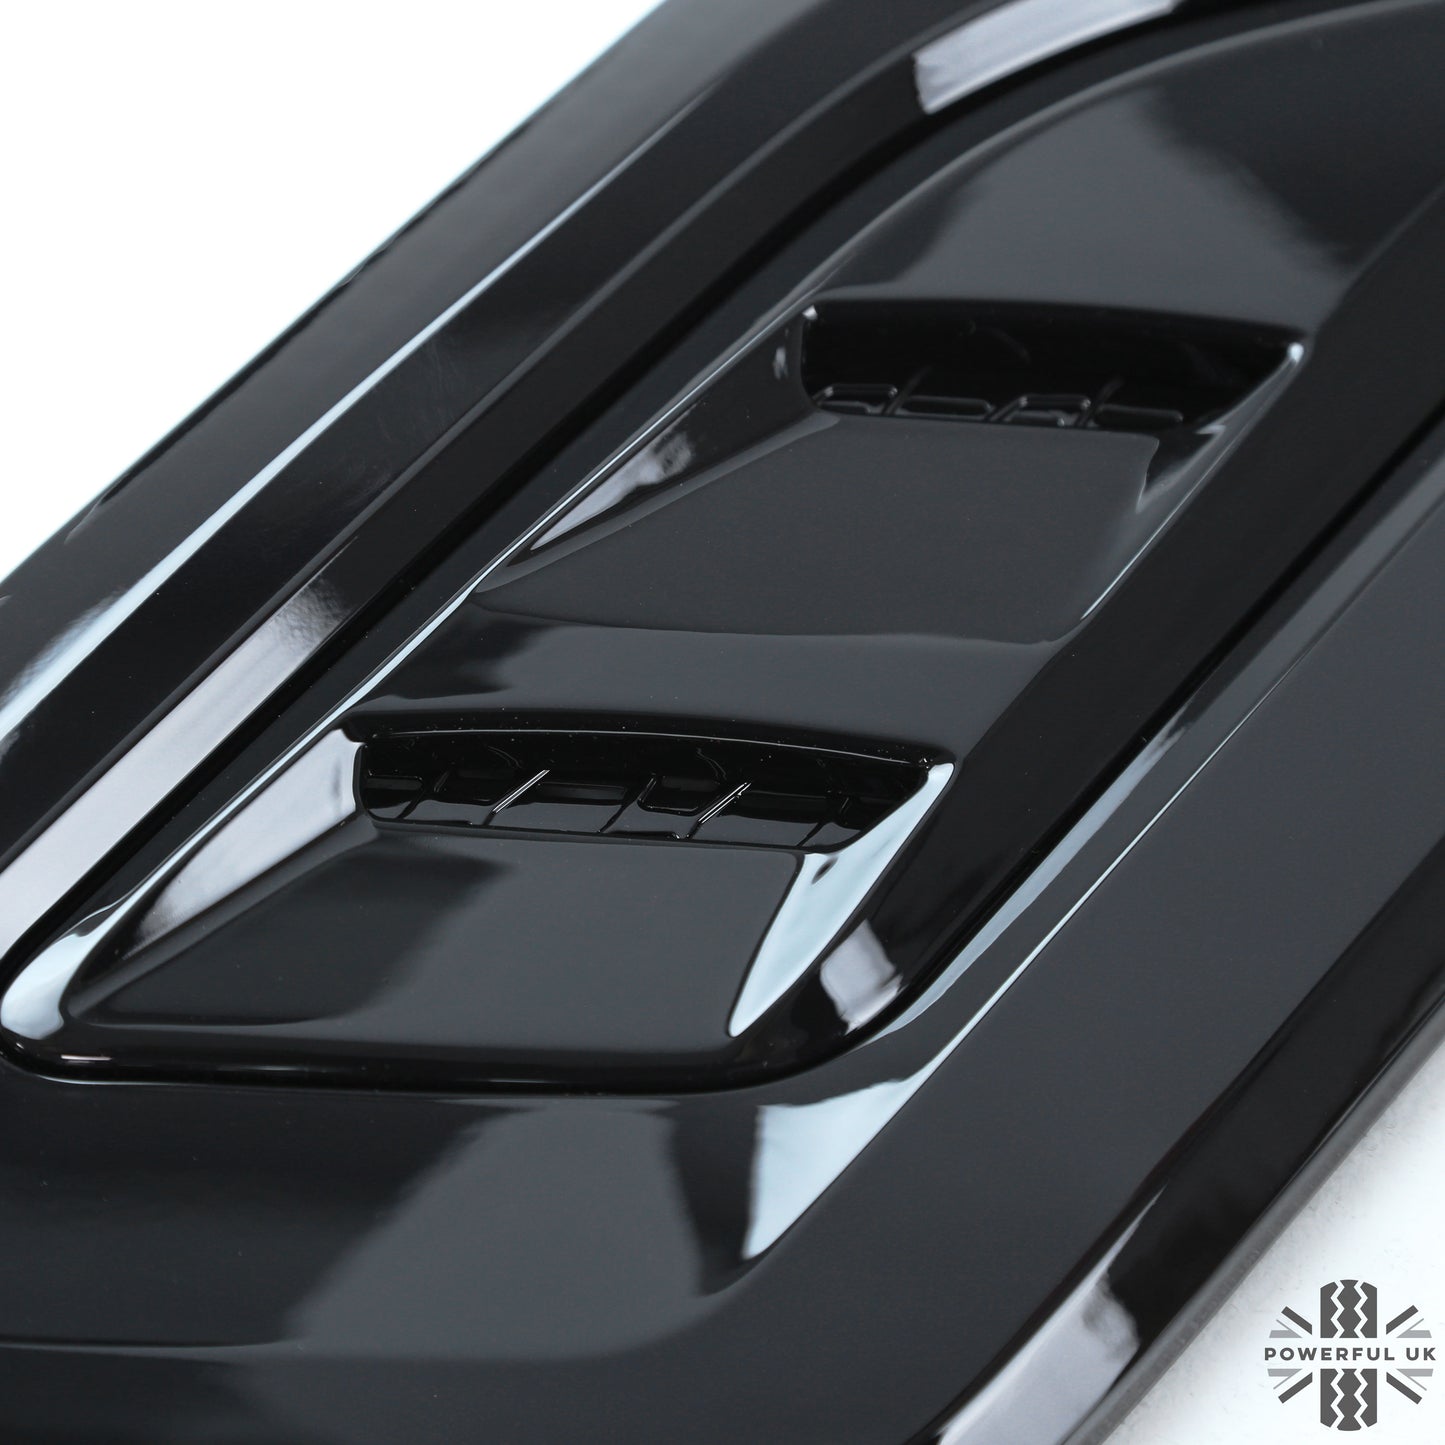 Bonnet Vents for Land Rover Discovery 3/4 - All Gloss Black